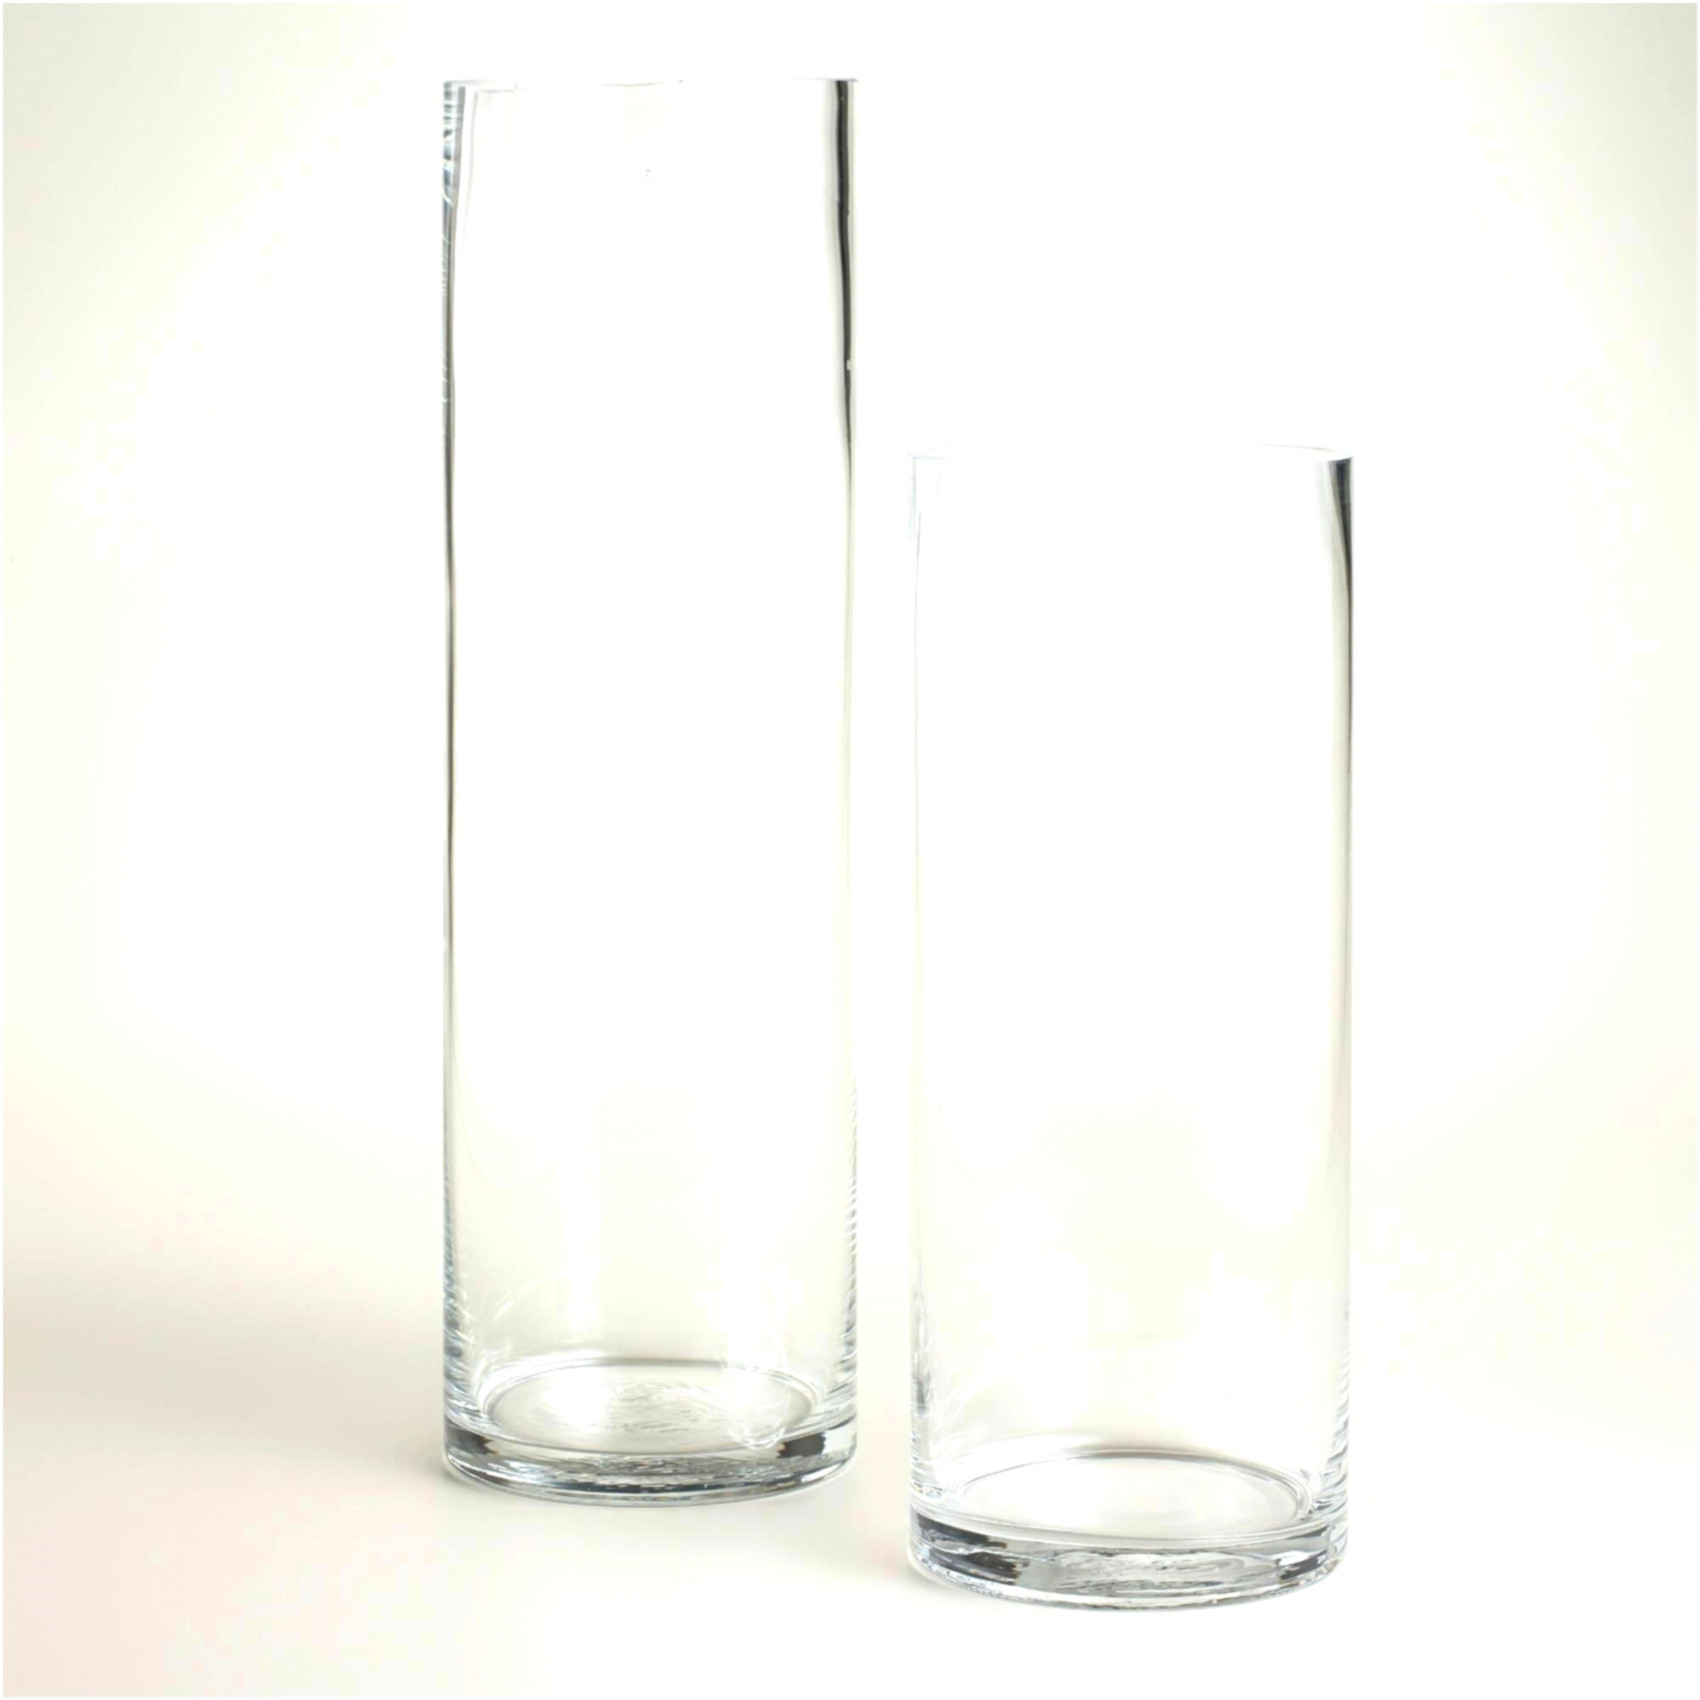 25 Recommended 12 Inch Vase 2024 free download 12 inch vase of why you should not go to glass vases wholesale glass vases within crystal glass vases wholesale inspirational 30 elegant vases with